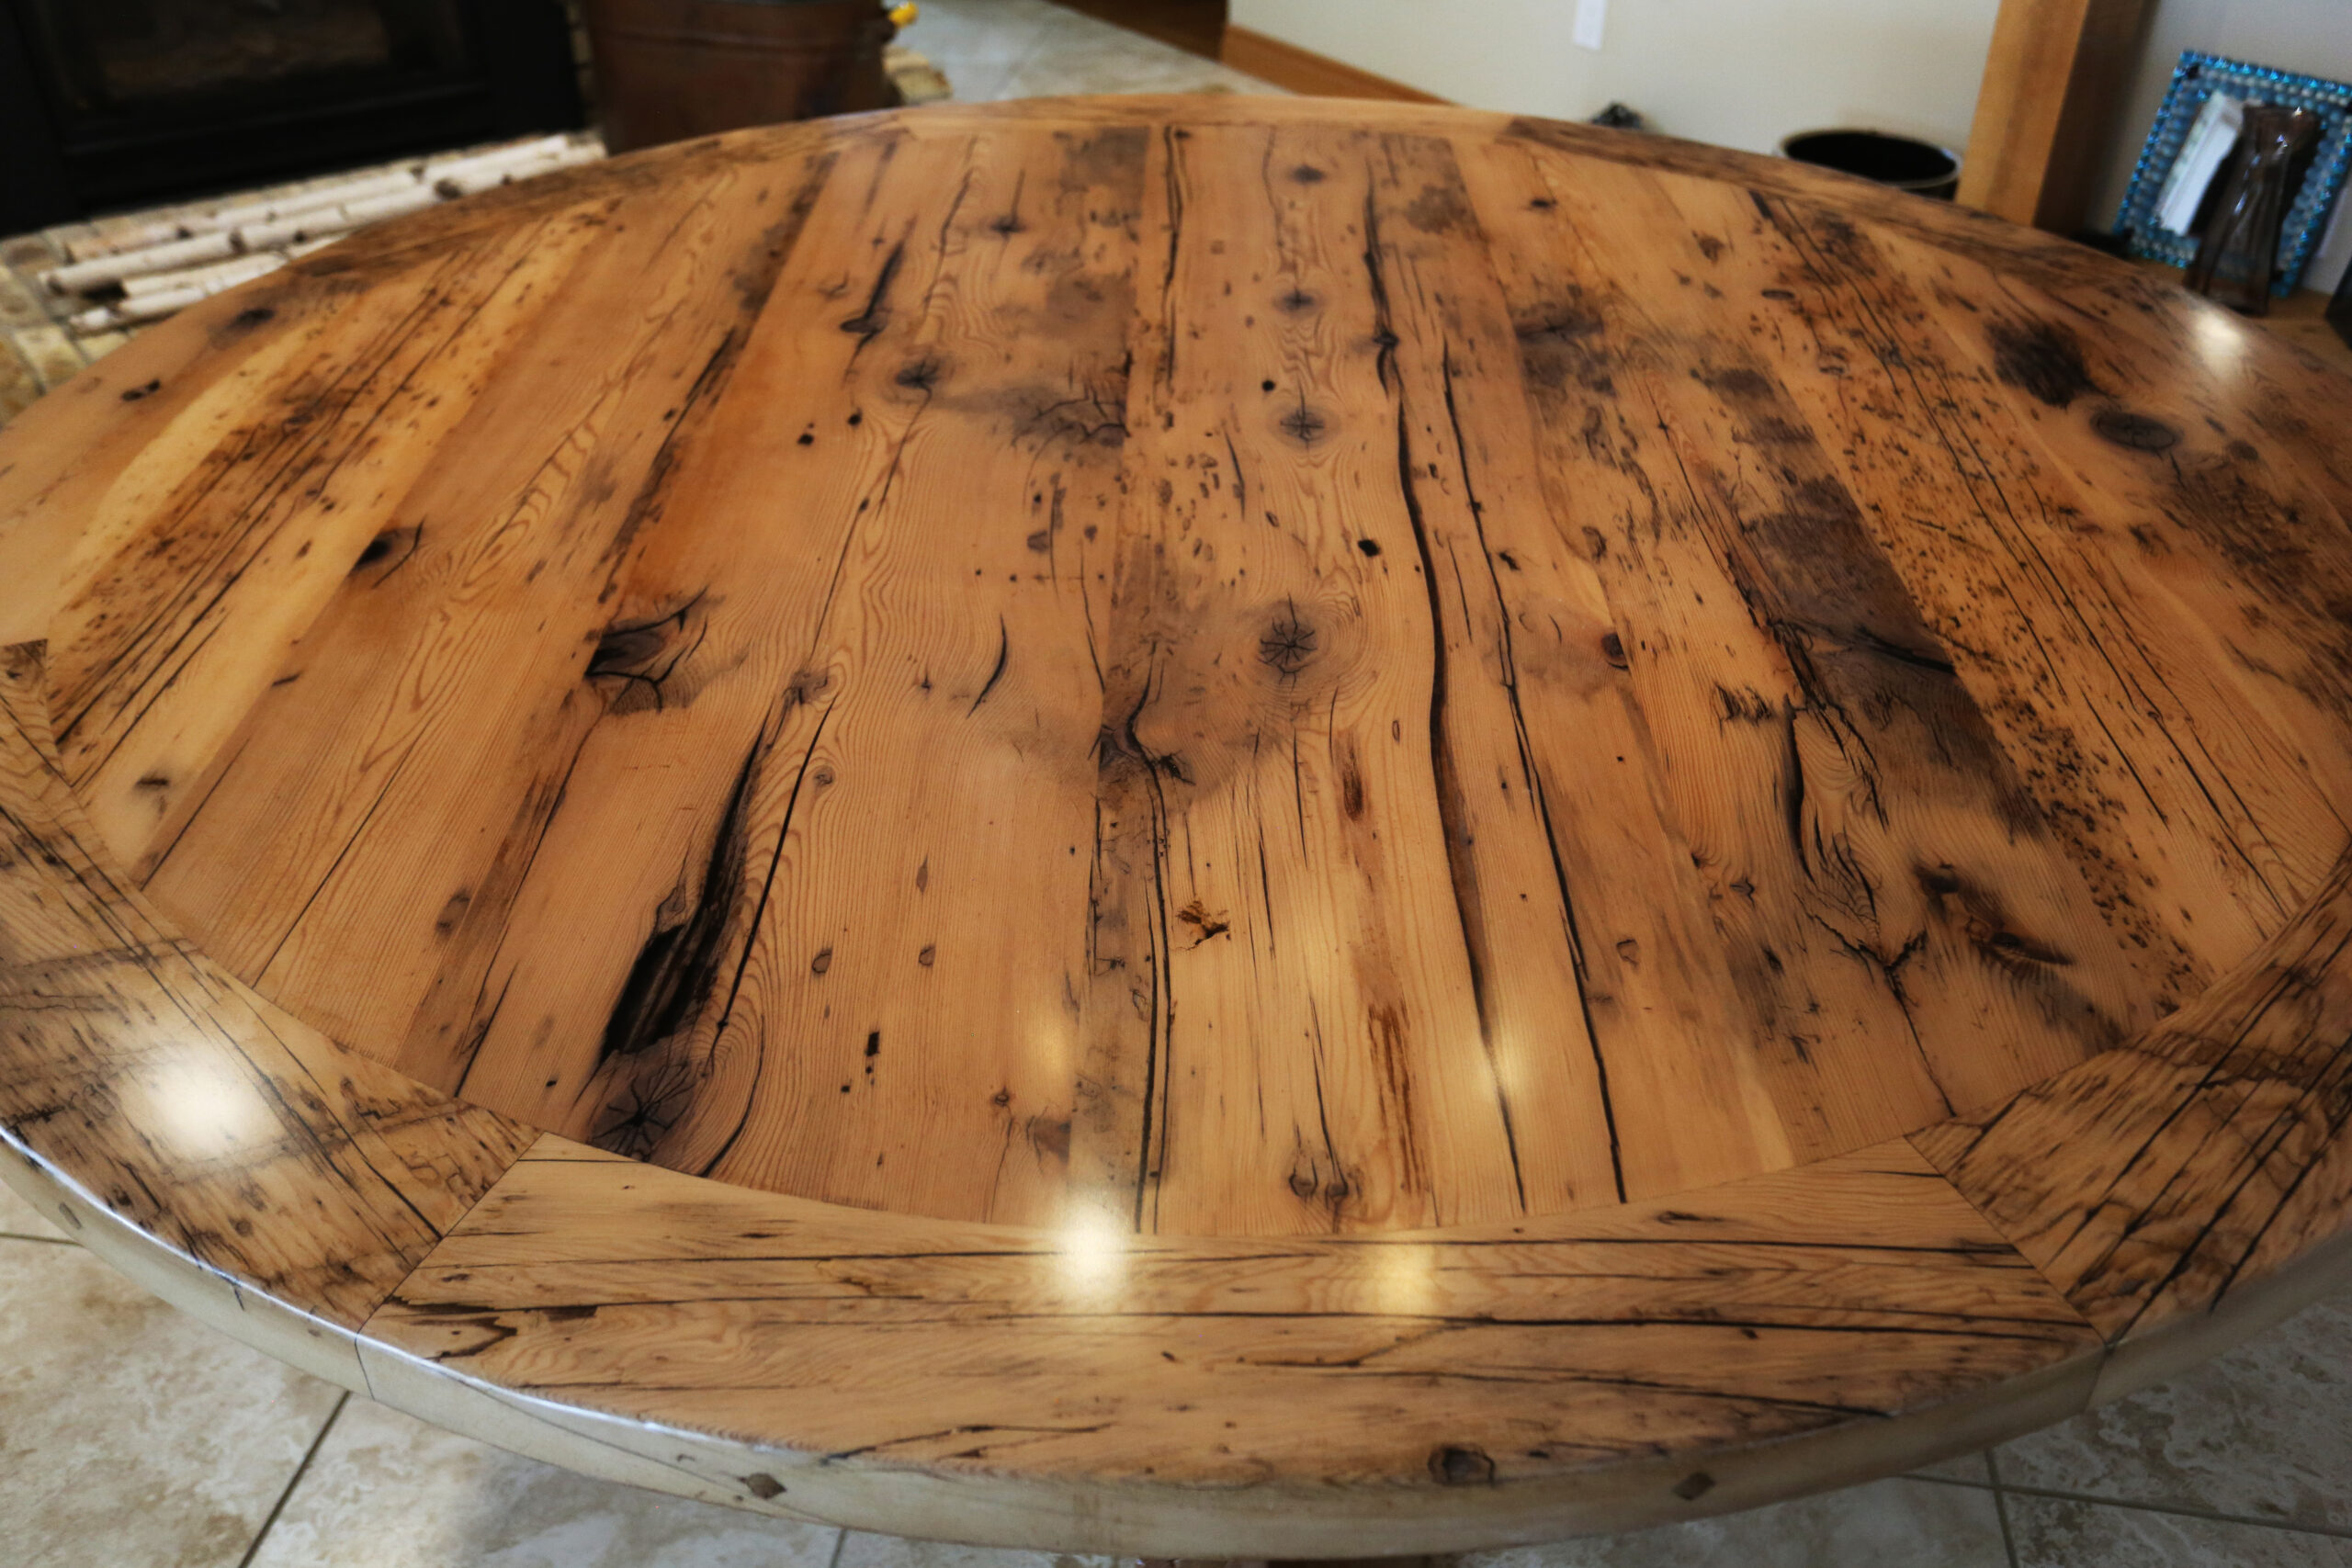 72” Reclaimed Ontario Barnwood Round Table we made for a Lakeside, Ontario home – Hand-Hewn Beam Post Base - Old Growth Hemlock Threshing Floor Construction - Original edges & distressing maintained – Bread Edge Boards –Premium epoxy + satin polyurethane finish – Greytone Option - www.table.ca